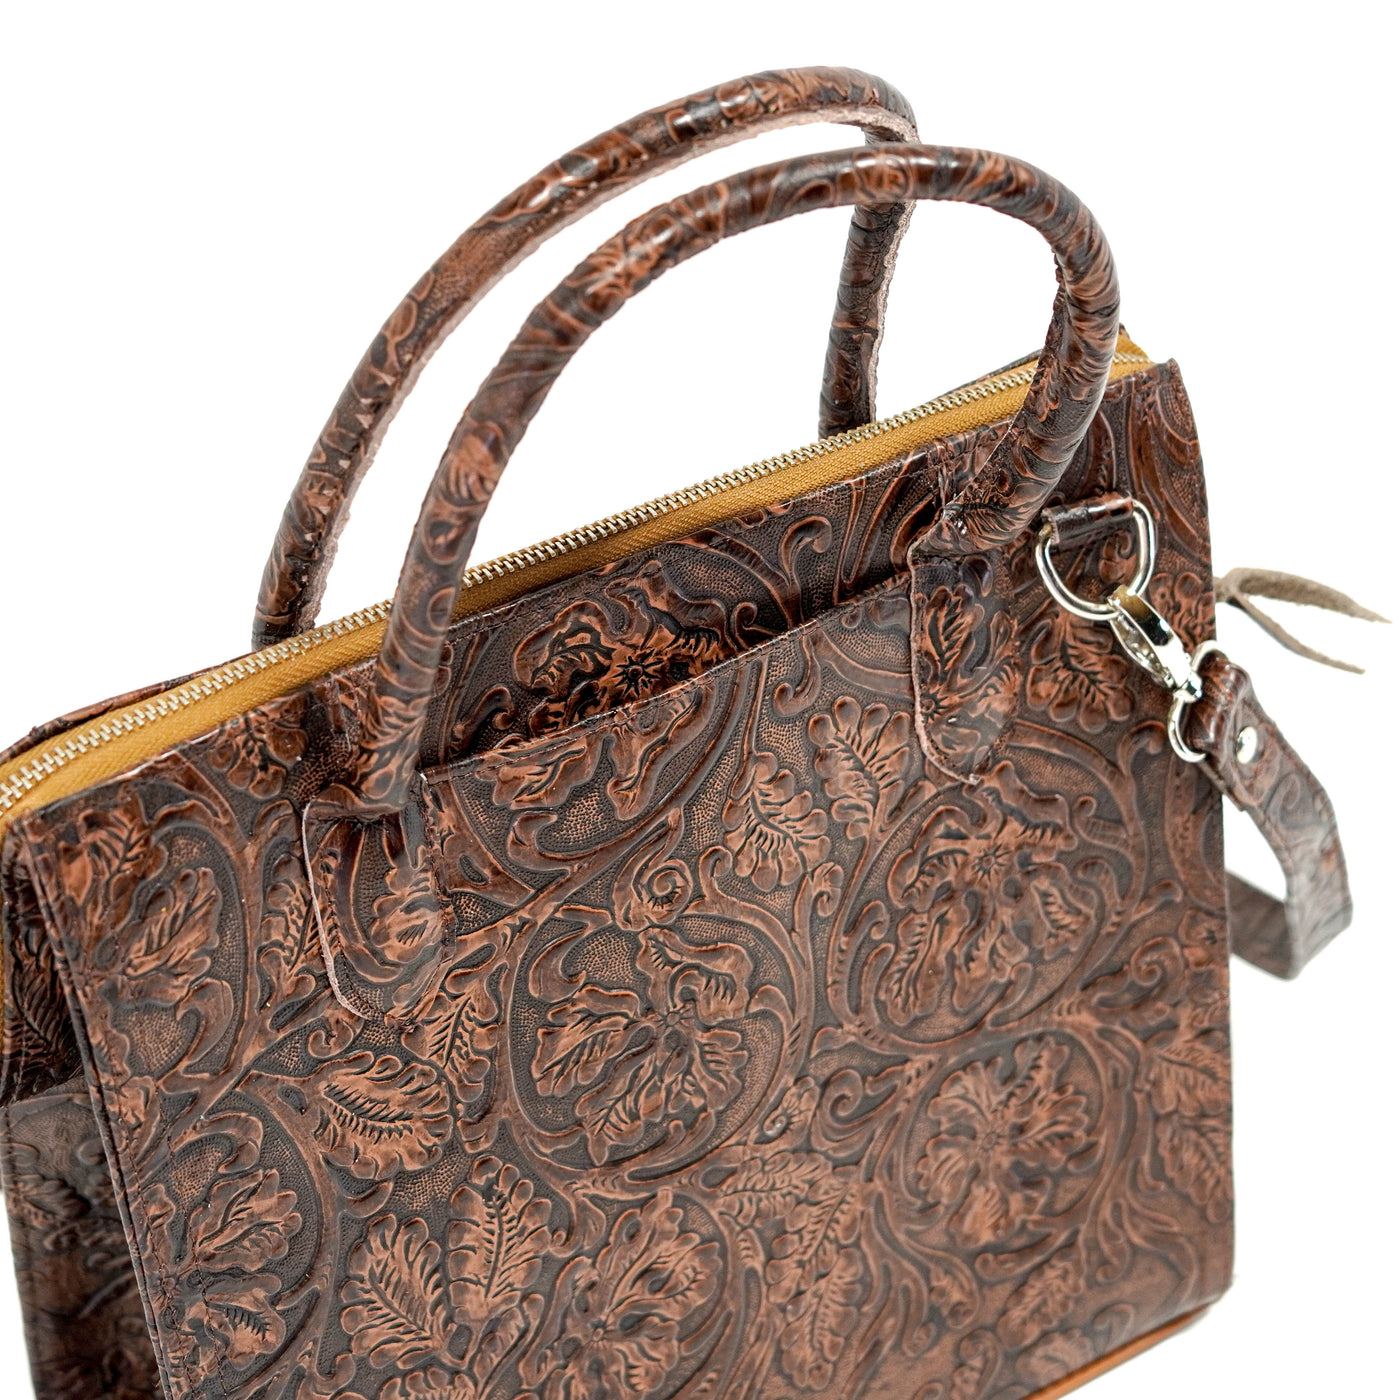 The Opry - All Embossed w/ Cowboy Tool-The Opry-Western-Cowhide-Bags-Handmade-Products-Gifts-Dancing Cactus Designs